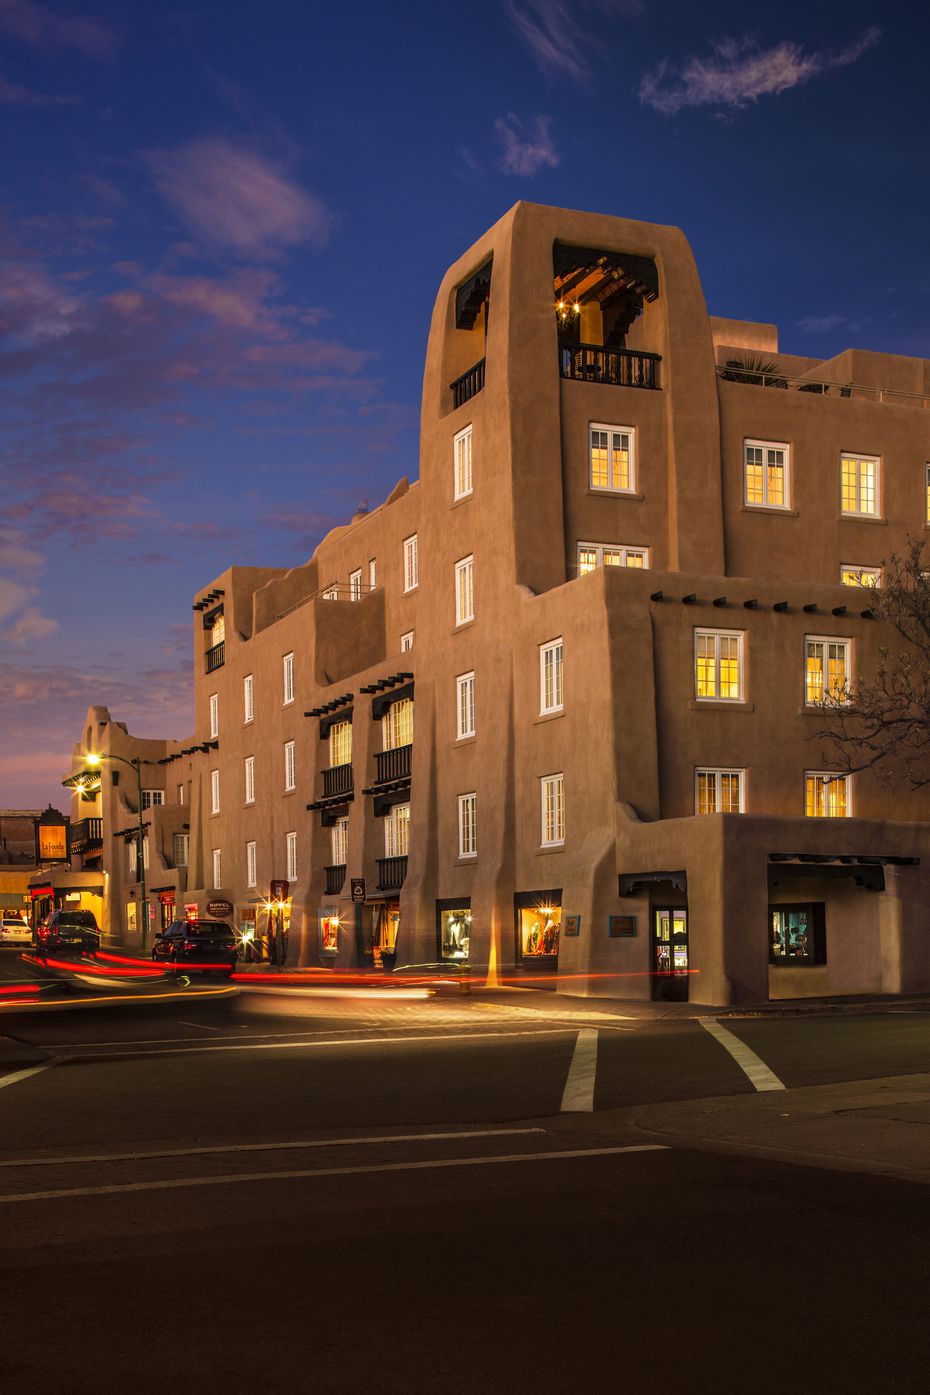 The La Fonda on the Plaza hotel in Santa Fe turns 100 in 2022, but the storied property has a history stretching back much further. The historic corner has had an inn on the site since 1607.